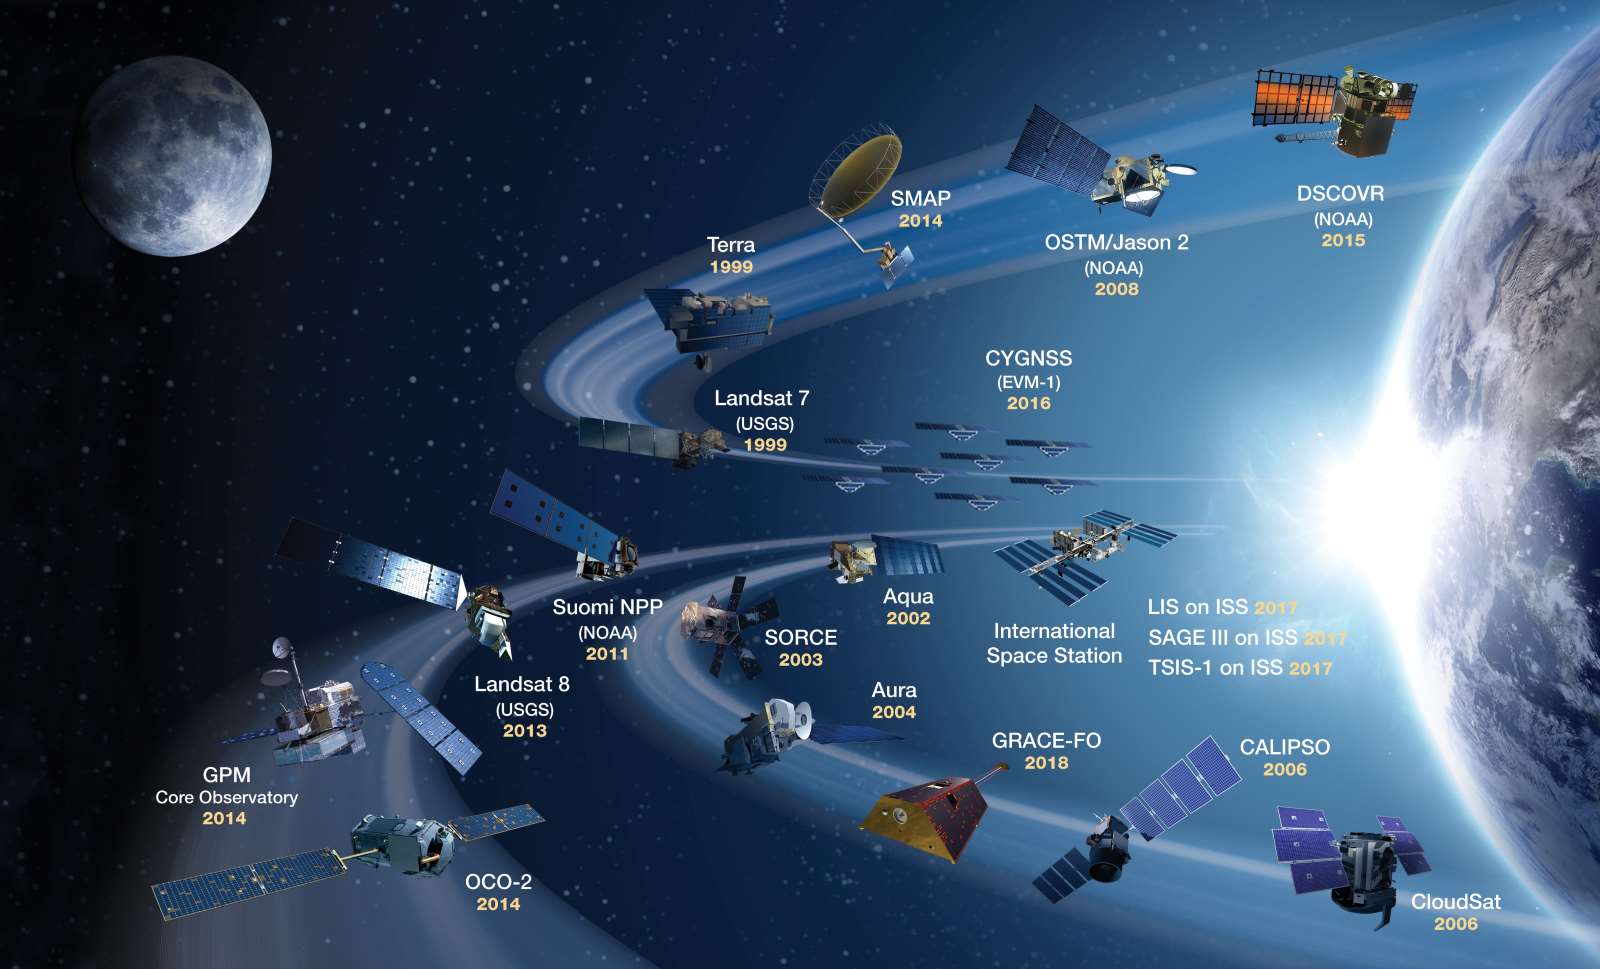 NASA Missions Save Lives on Earth: NASA's current (as of October 2018) Earth-observing satellite fleet with launch dates